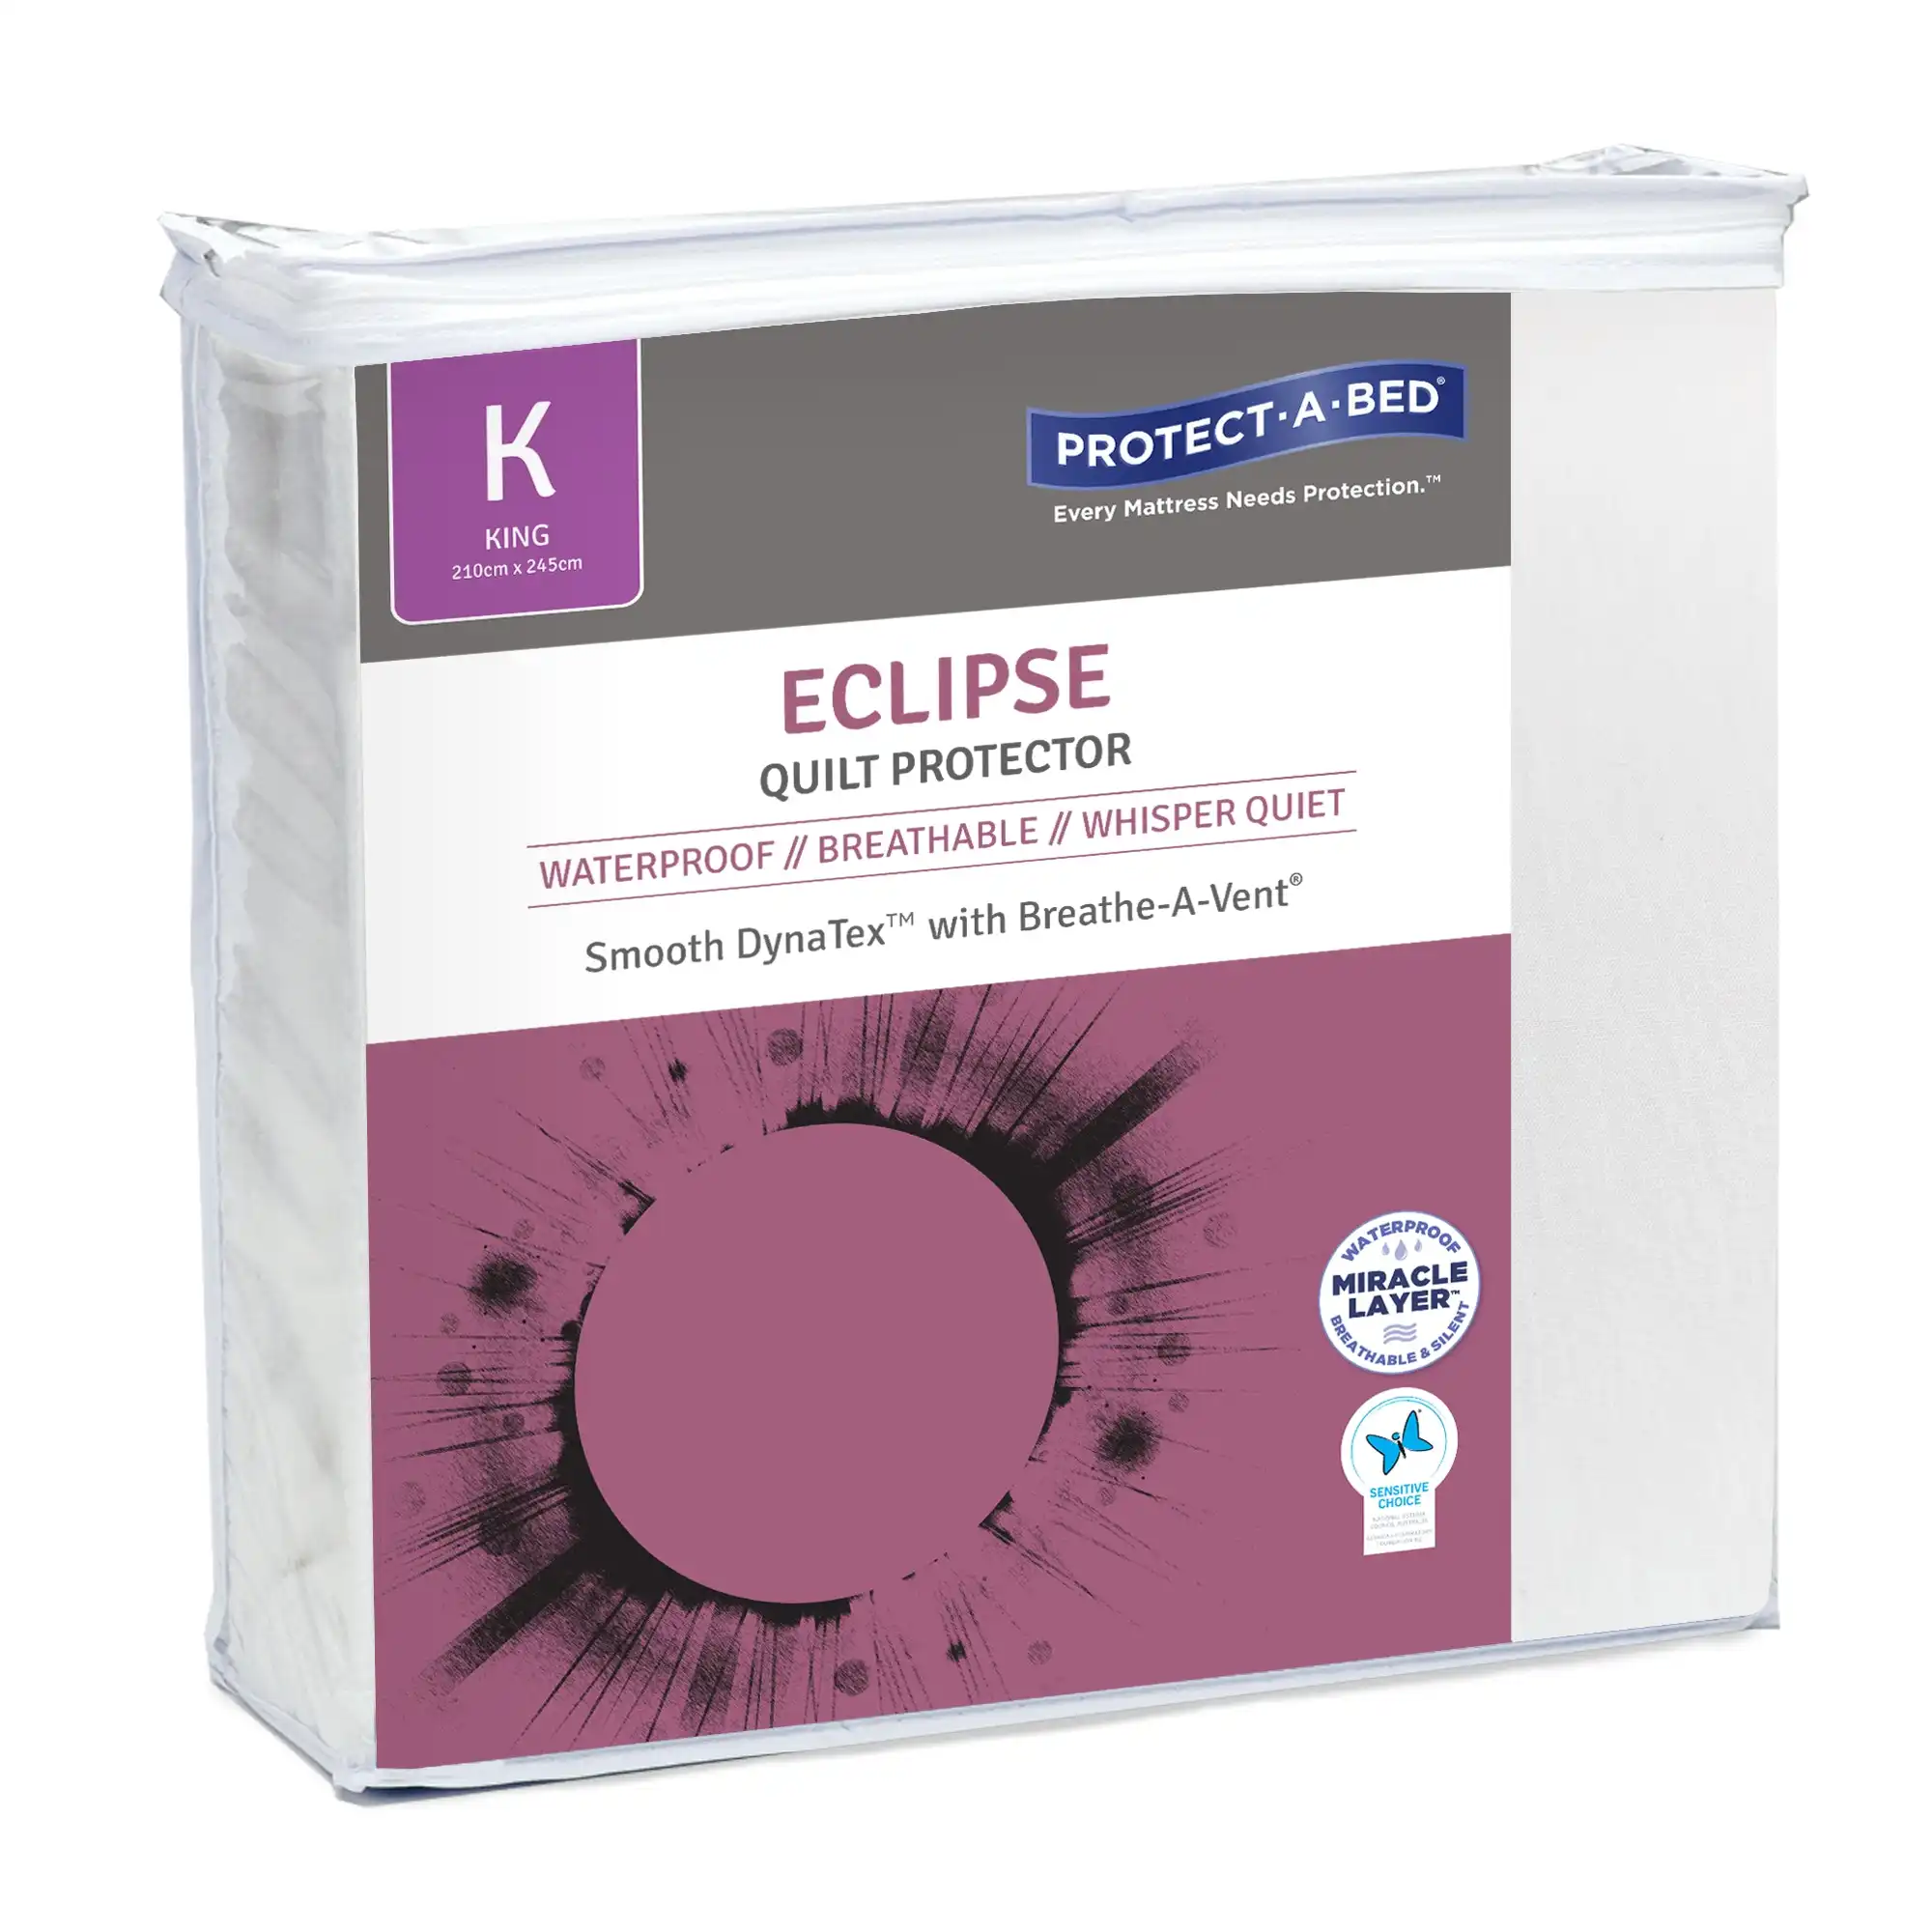 Protect A Bed Eclipse Smooth Dynatex Quilt Protector